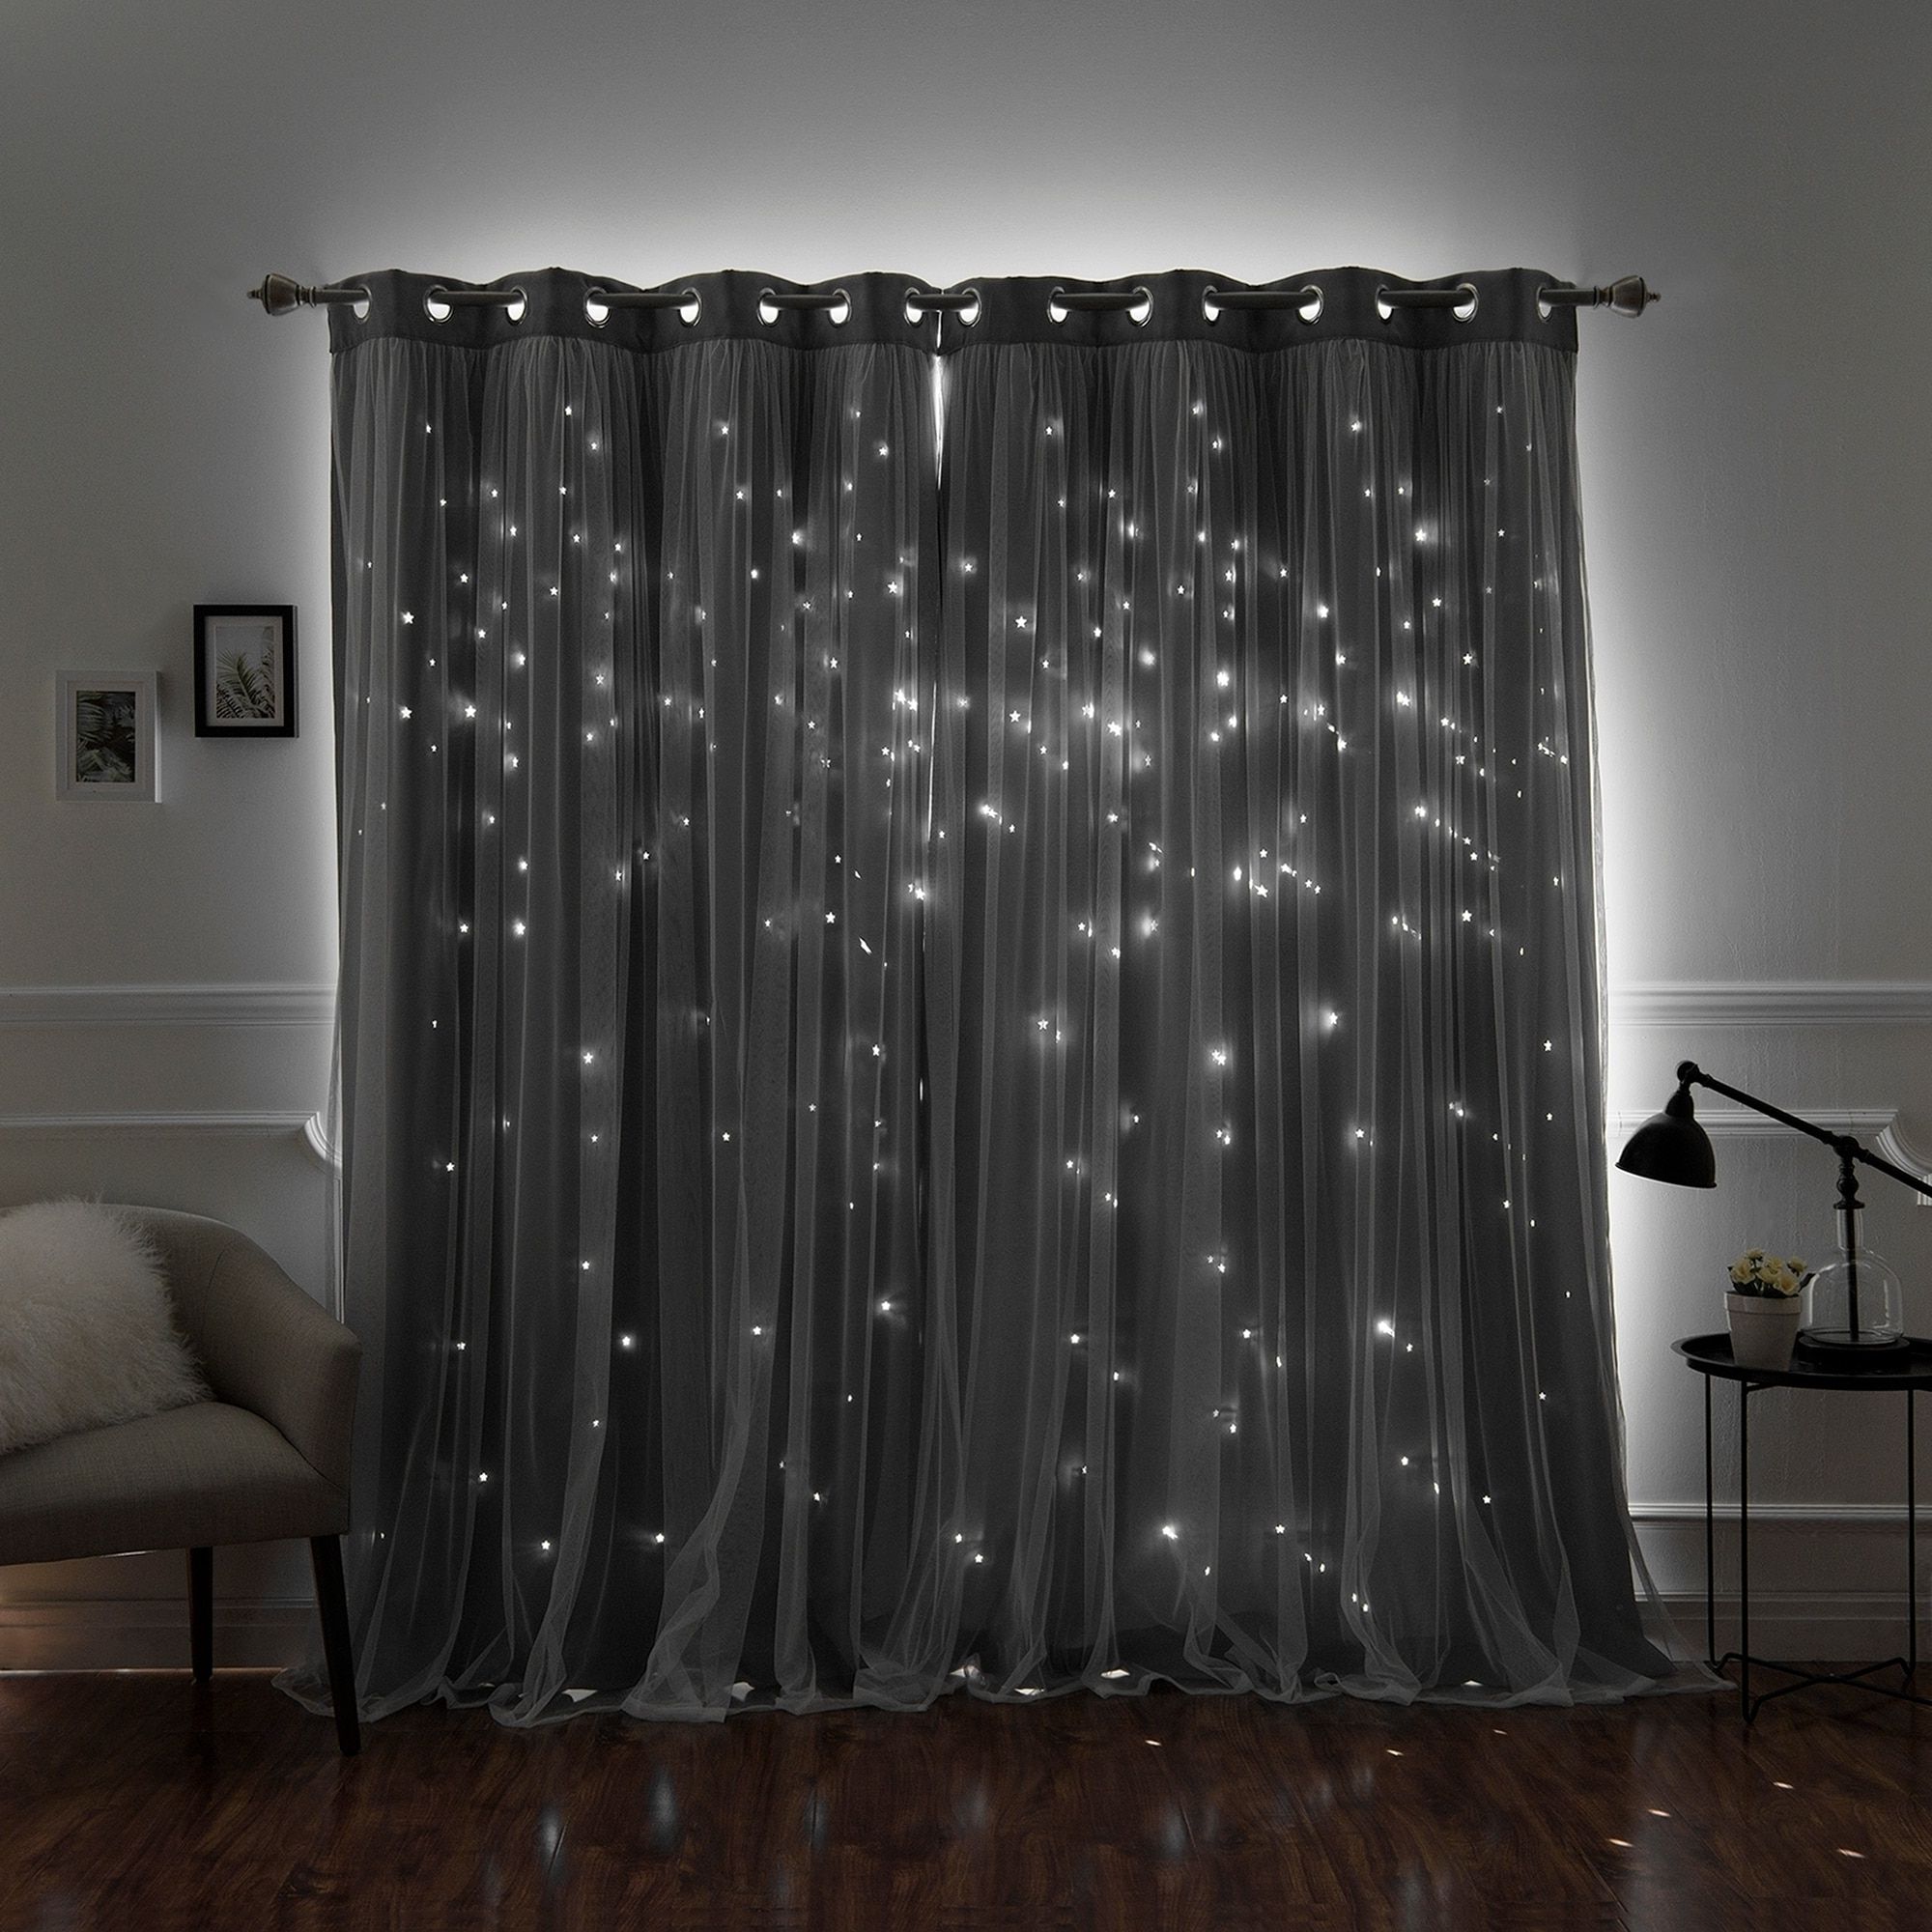 Well Liked Star Punch Tulle Overlay Blackout Curtain Panel Pairs With Aurora Home Star Punch Tulle Overlay Blackout Curtain Panel (View 1 of 20)